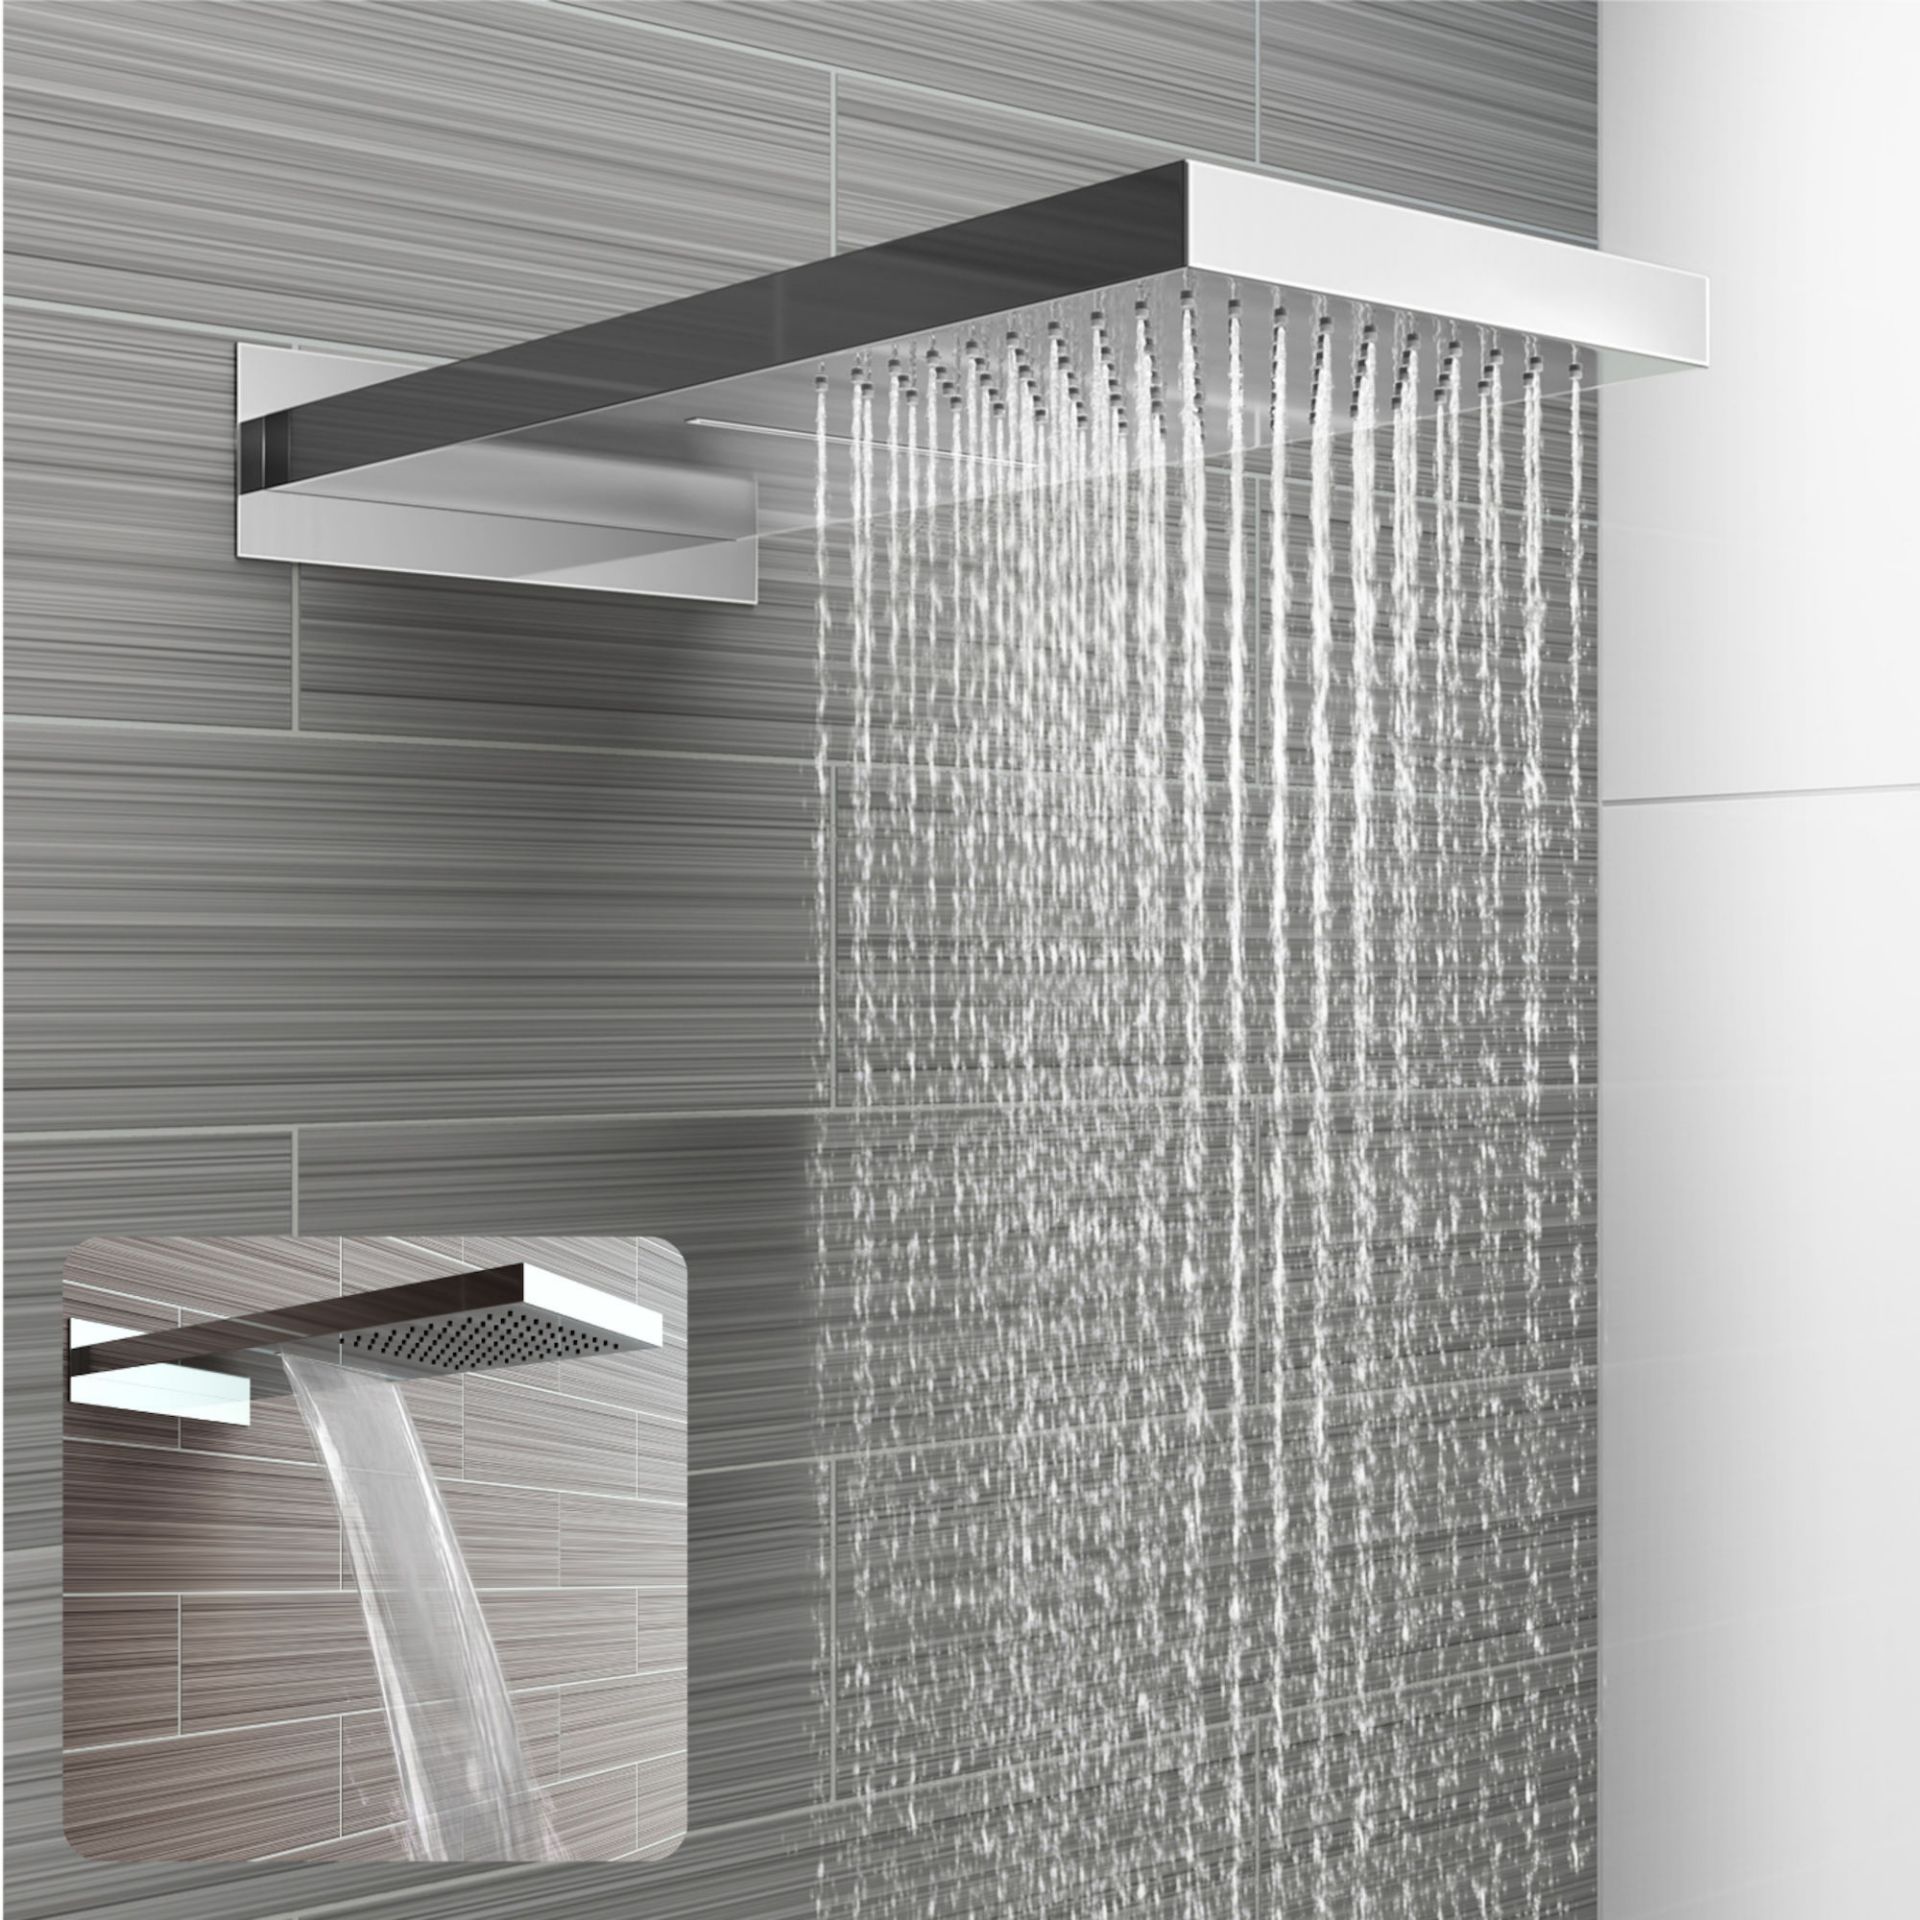 (CT7) 230x500mm Stainless Steel Waterfall Shower Head. RRP £374.98. Dual function waterfall and